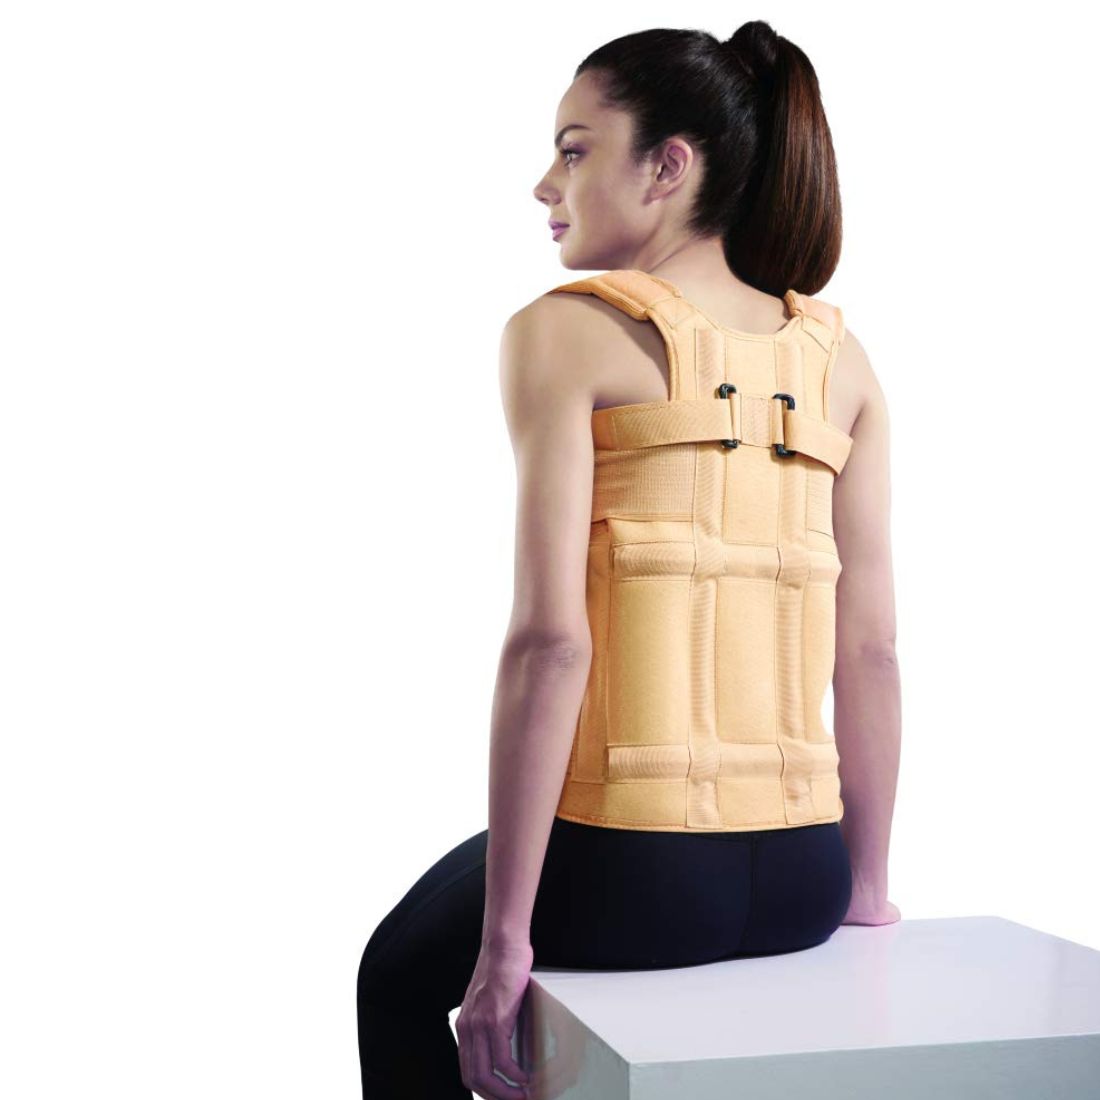 Vissco Dorso Lumbar Spinal Taylor brace supports and immobilizes the spine in neutral position, still permitting the requisite motion of the complete body.